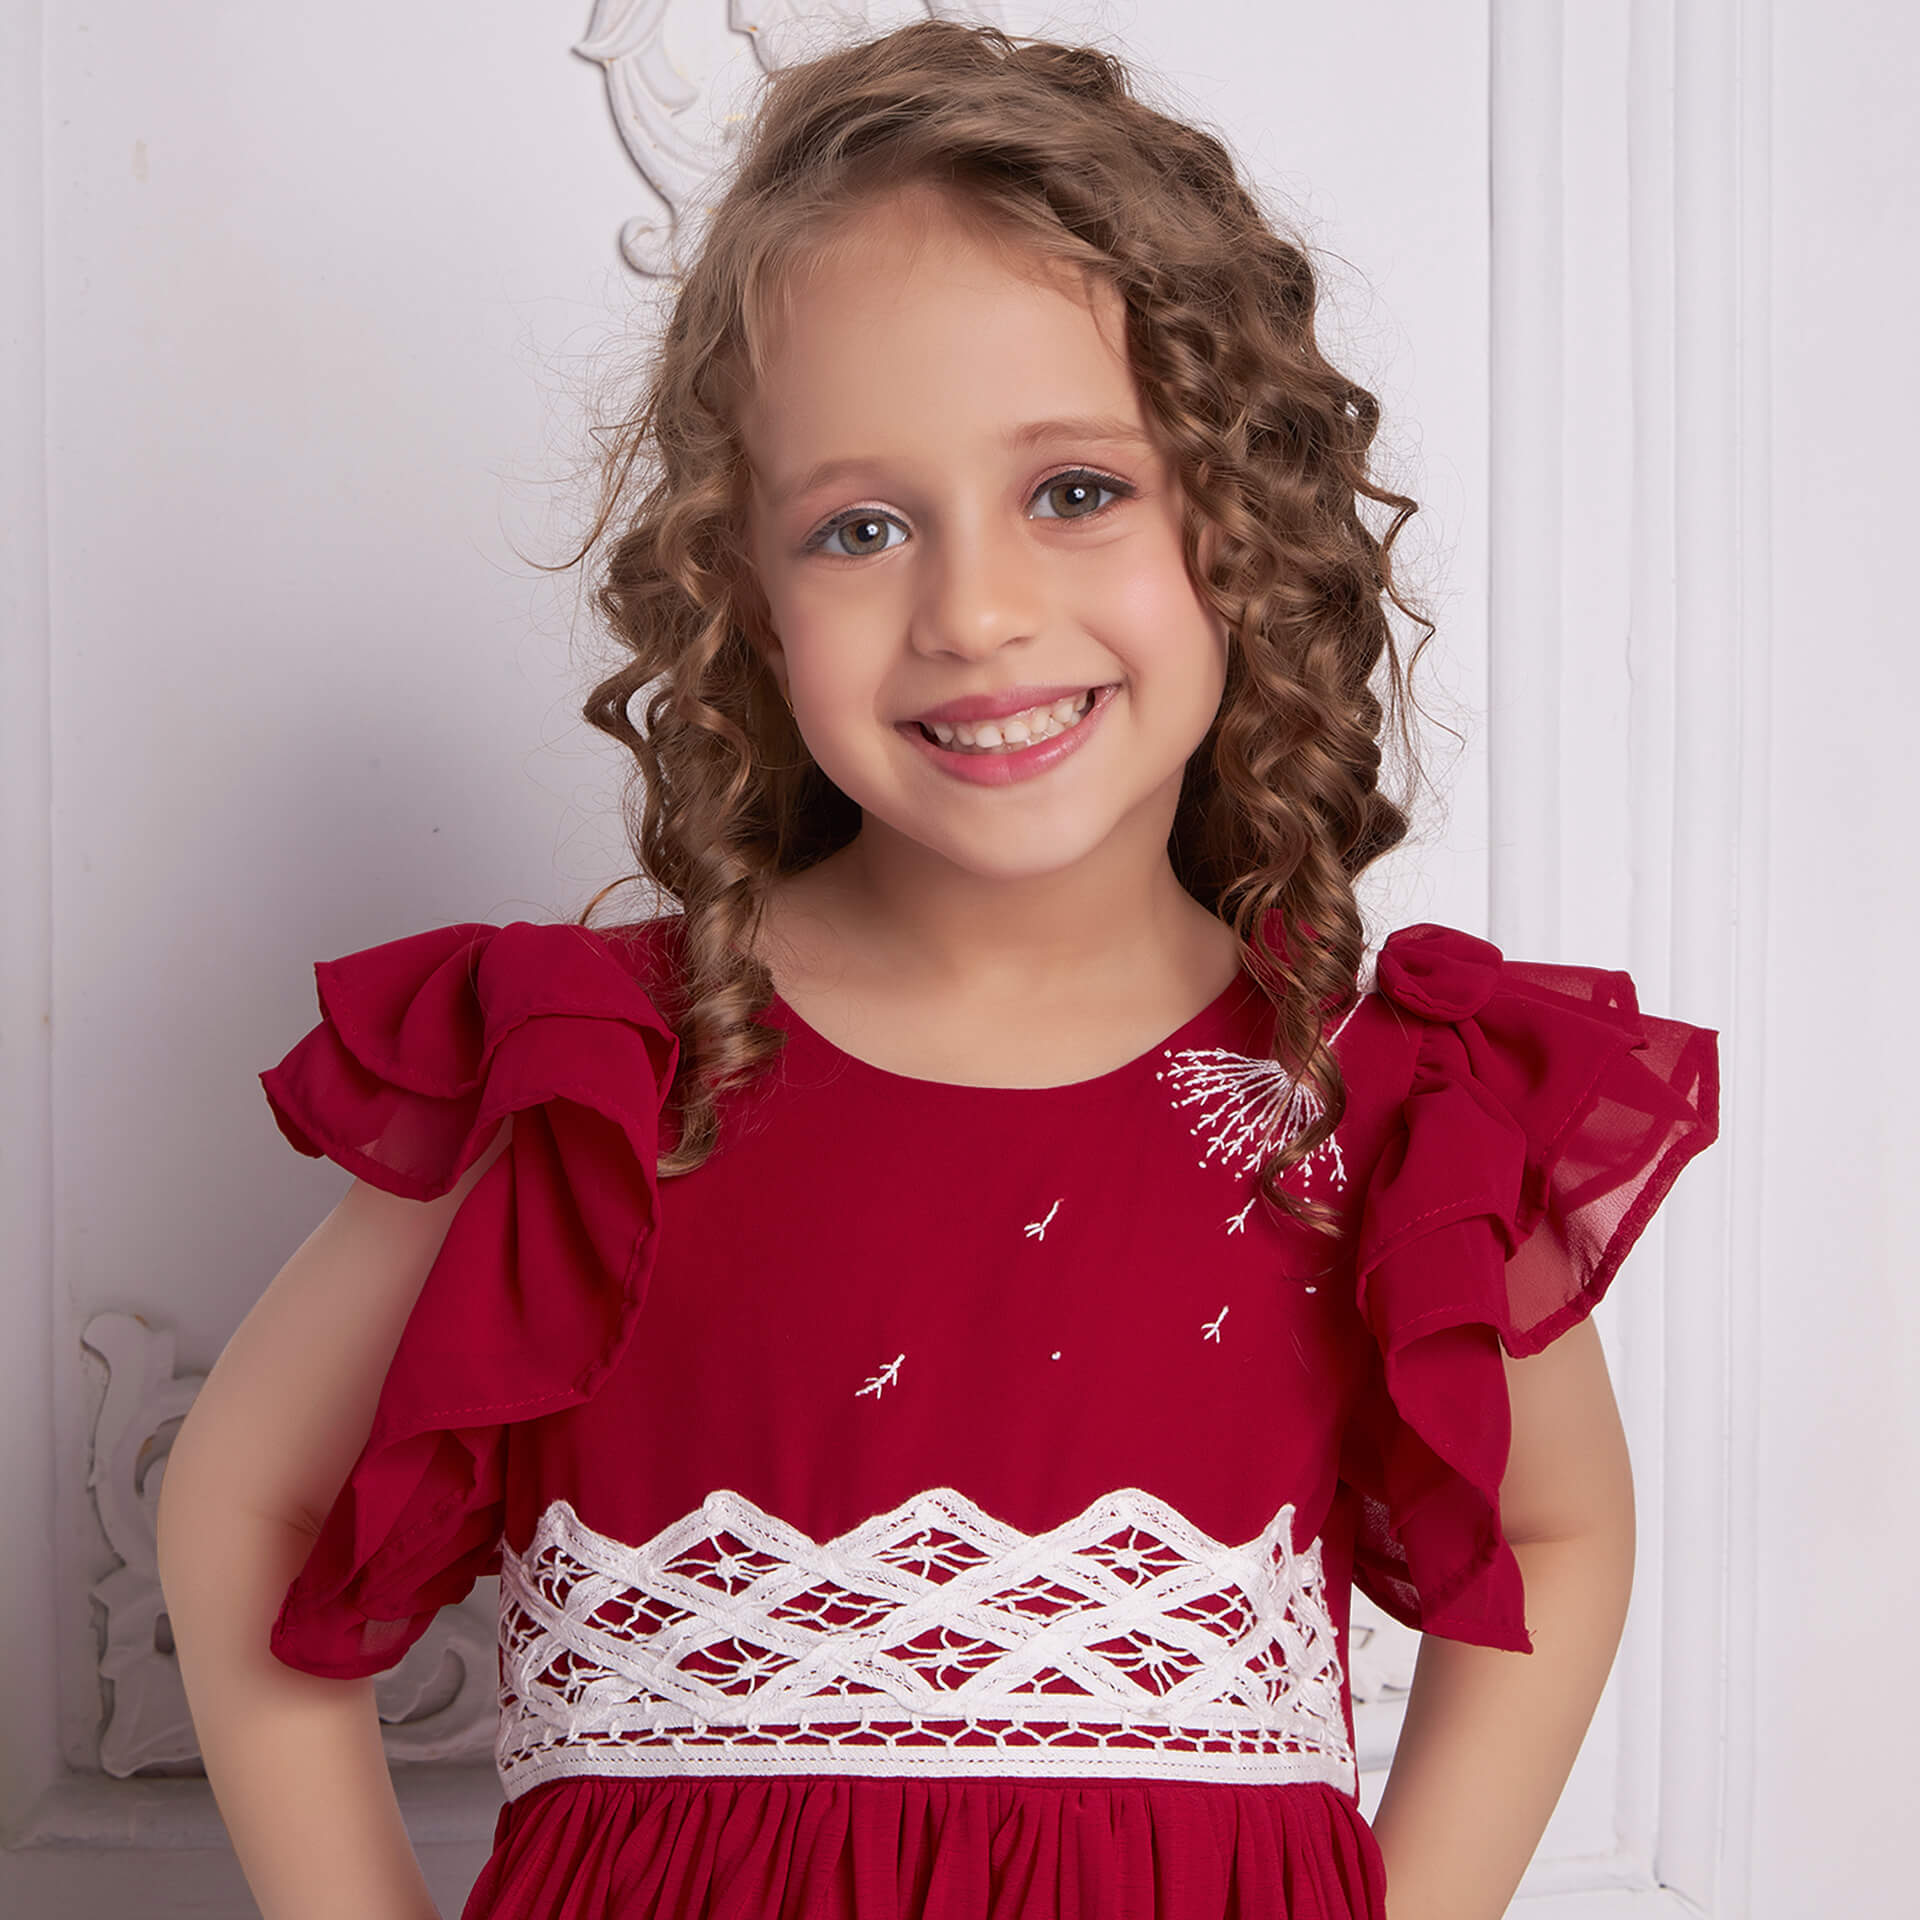 Close up of a smiling girl in a red chiffon battenburg lace dress